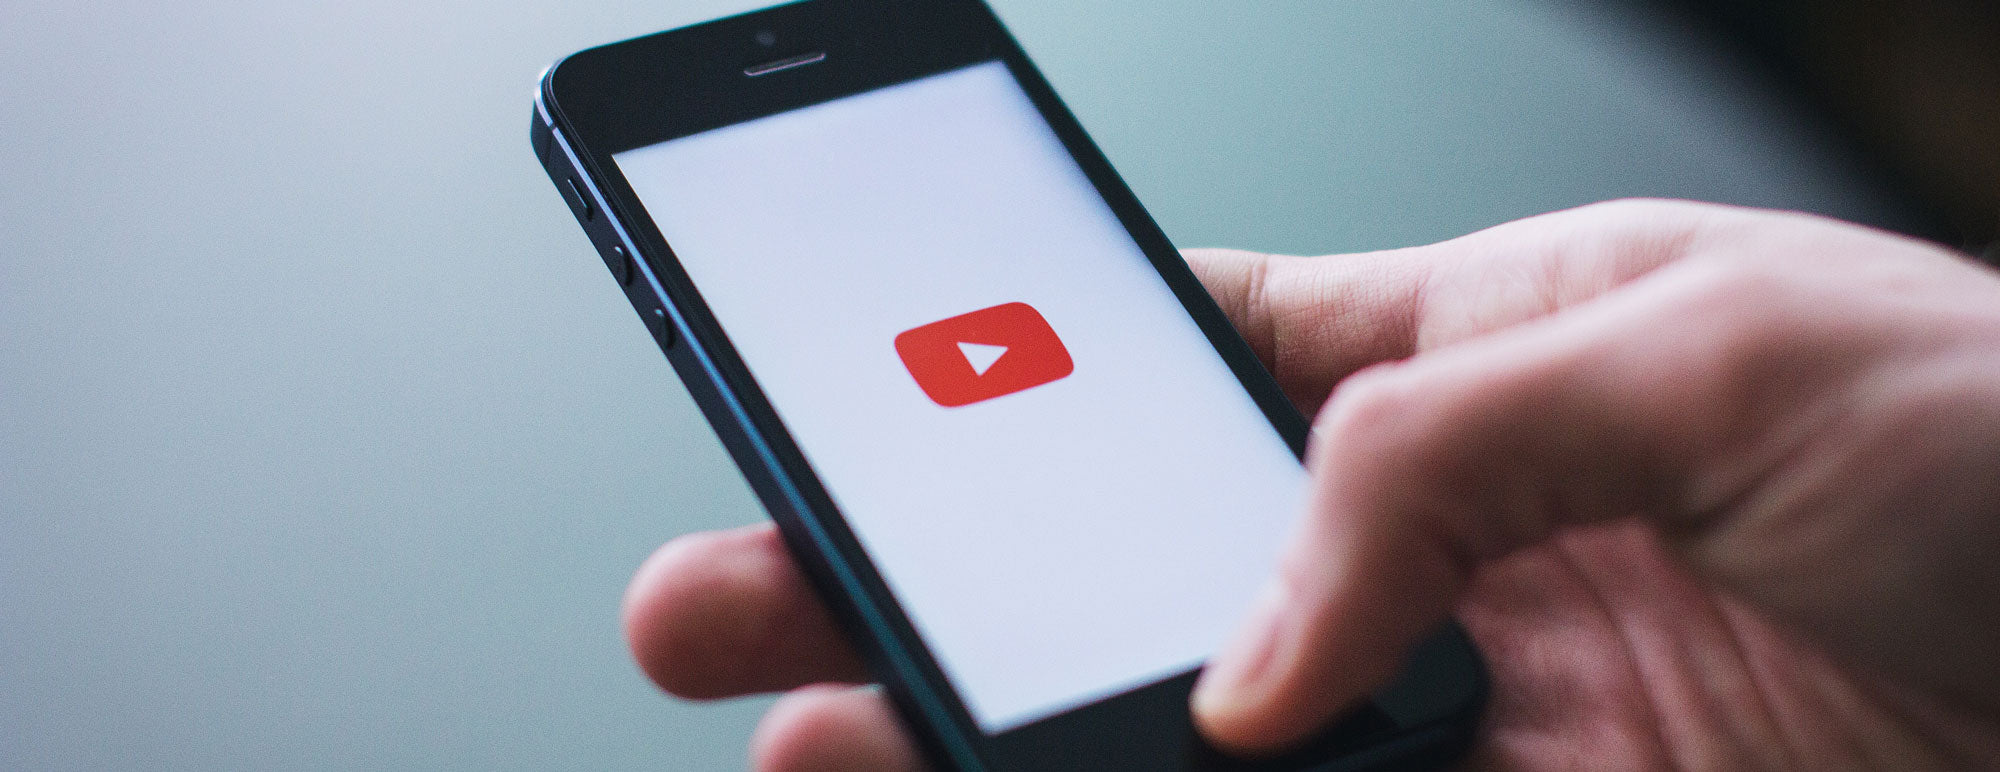 How To Stream Live to YouTube Live